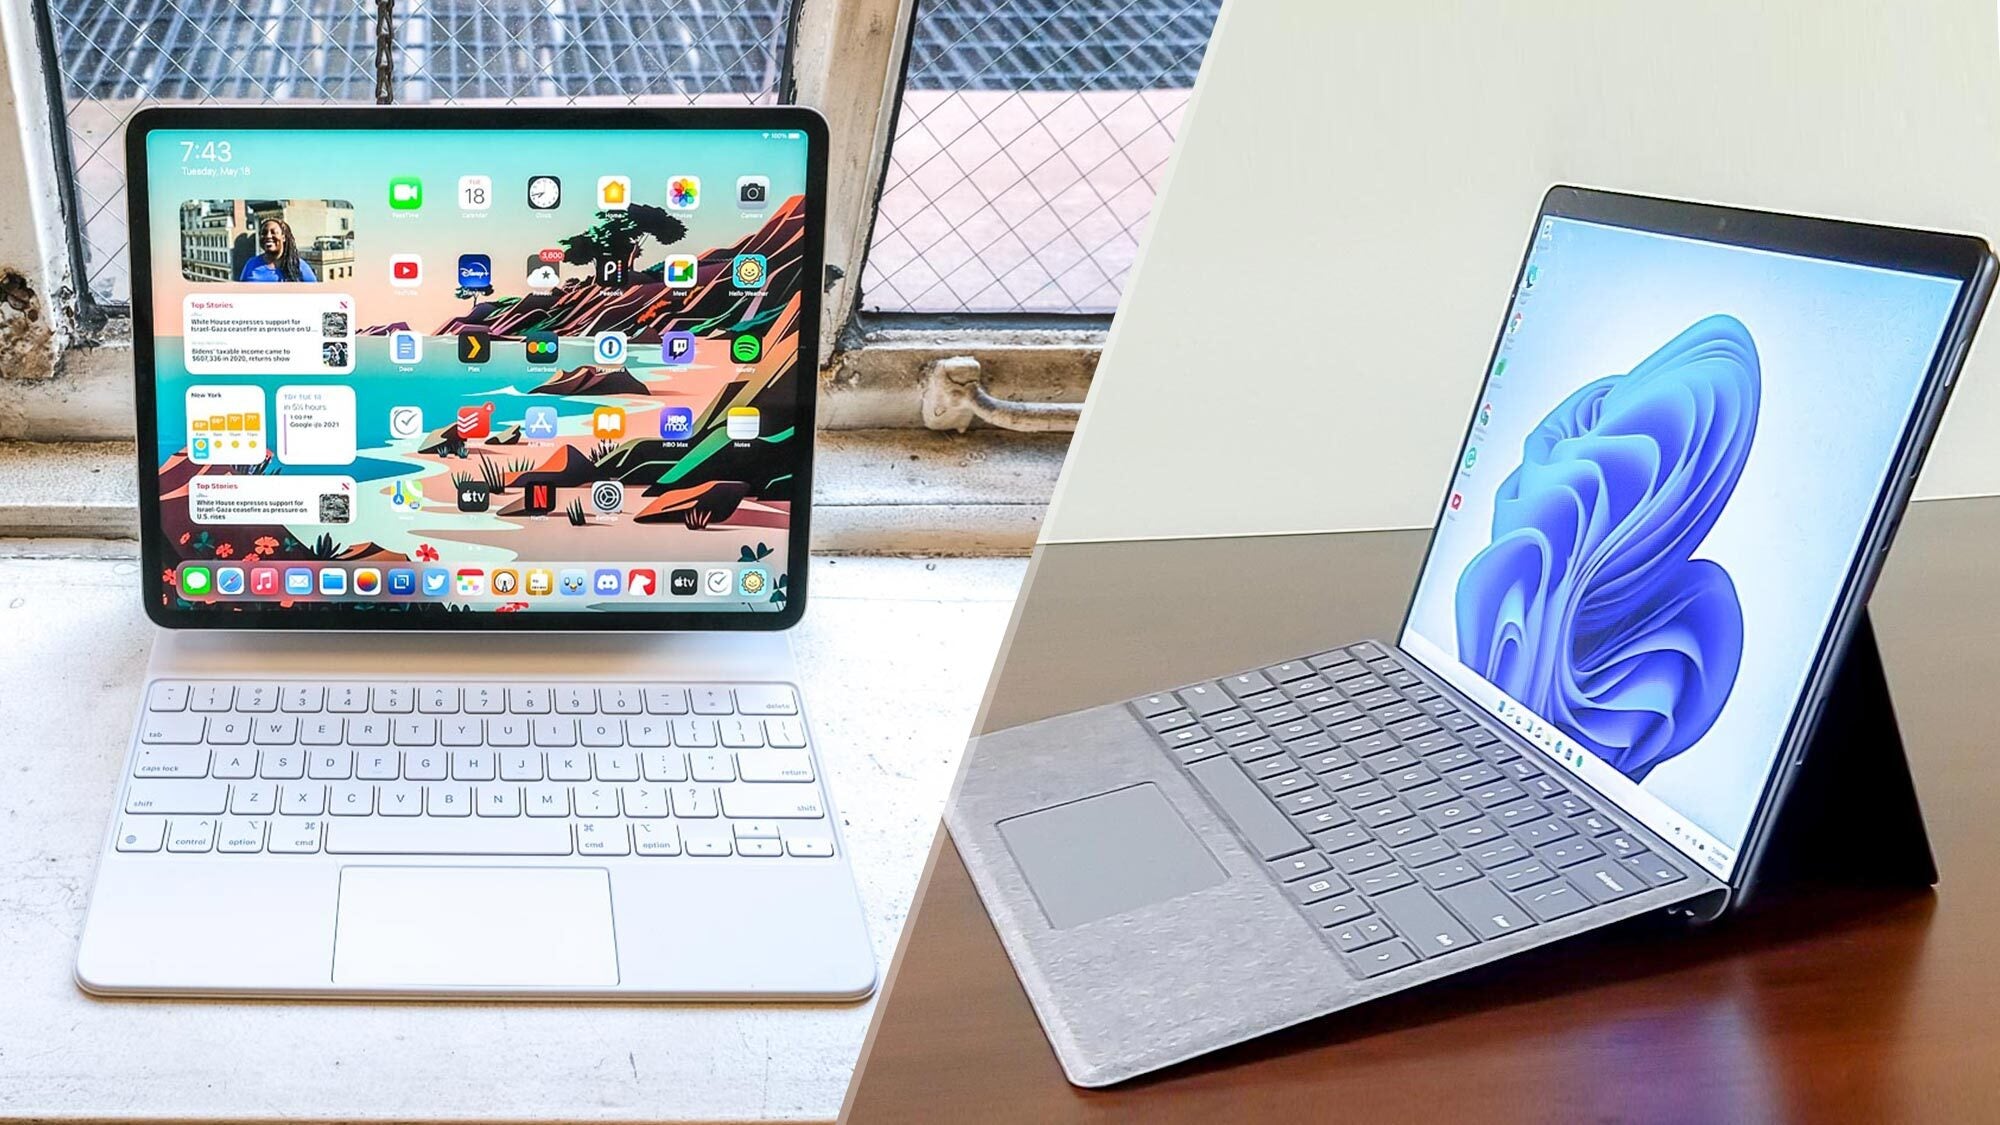 microsoft surface tablet vs ipad: Which is Better for You in 2023?